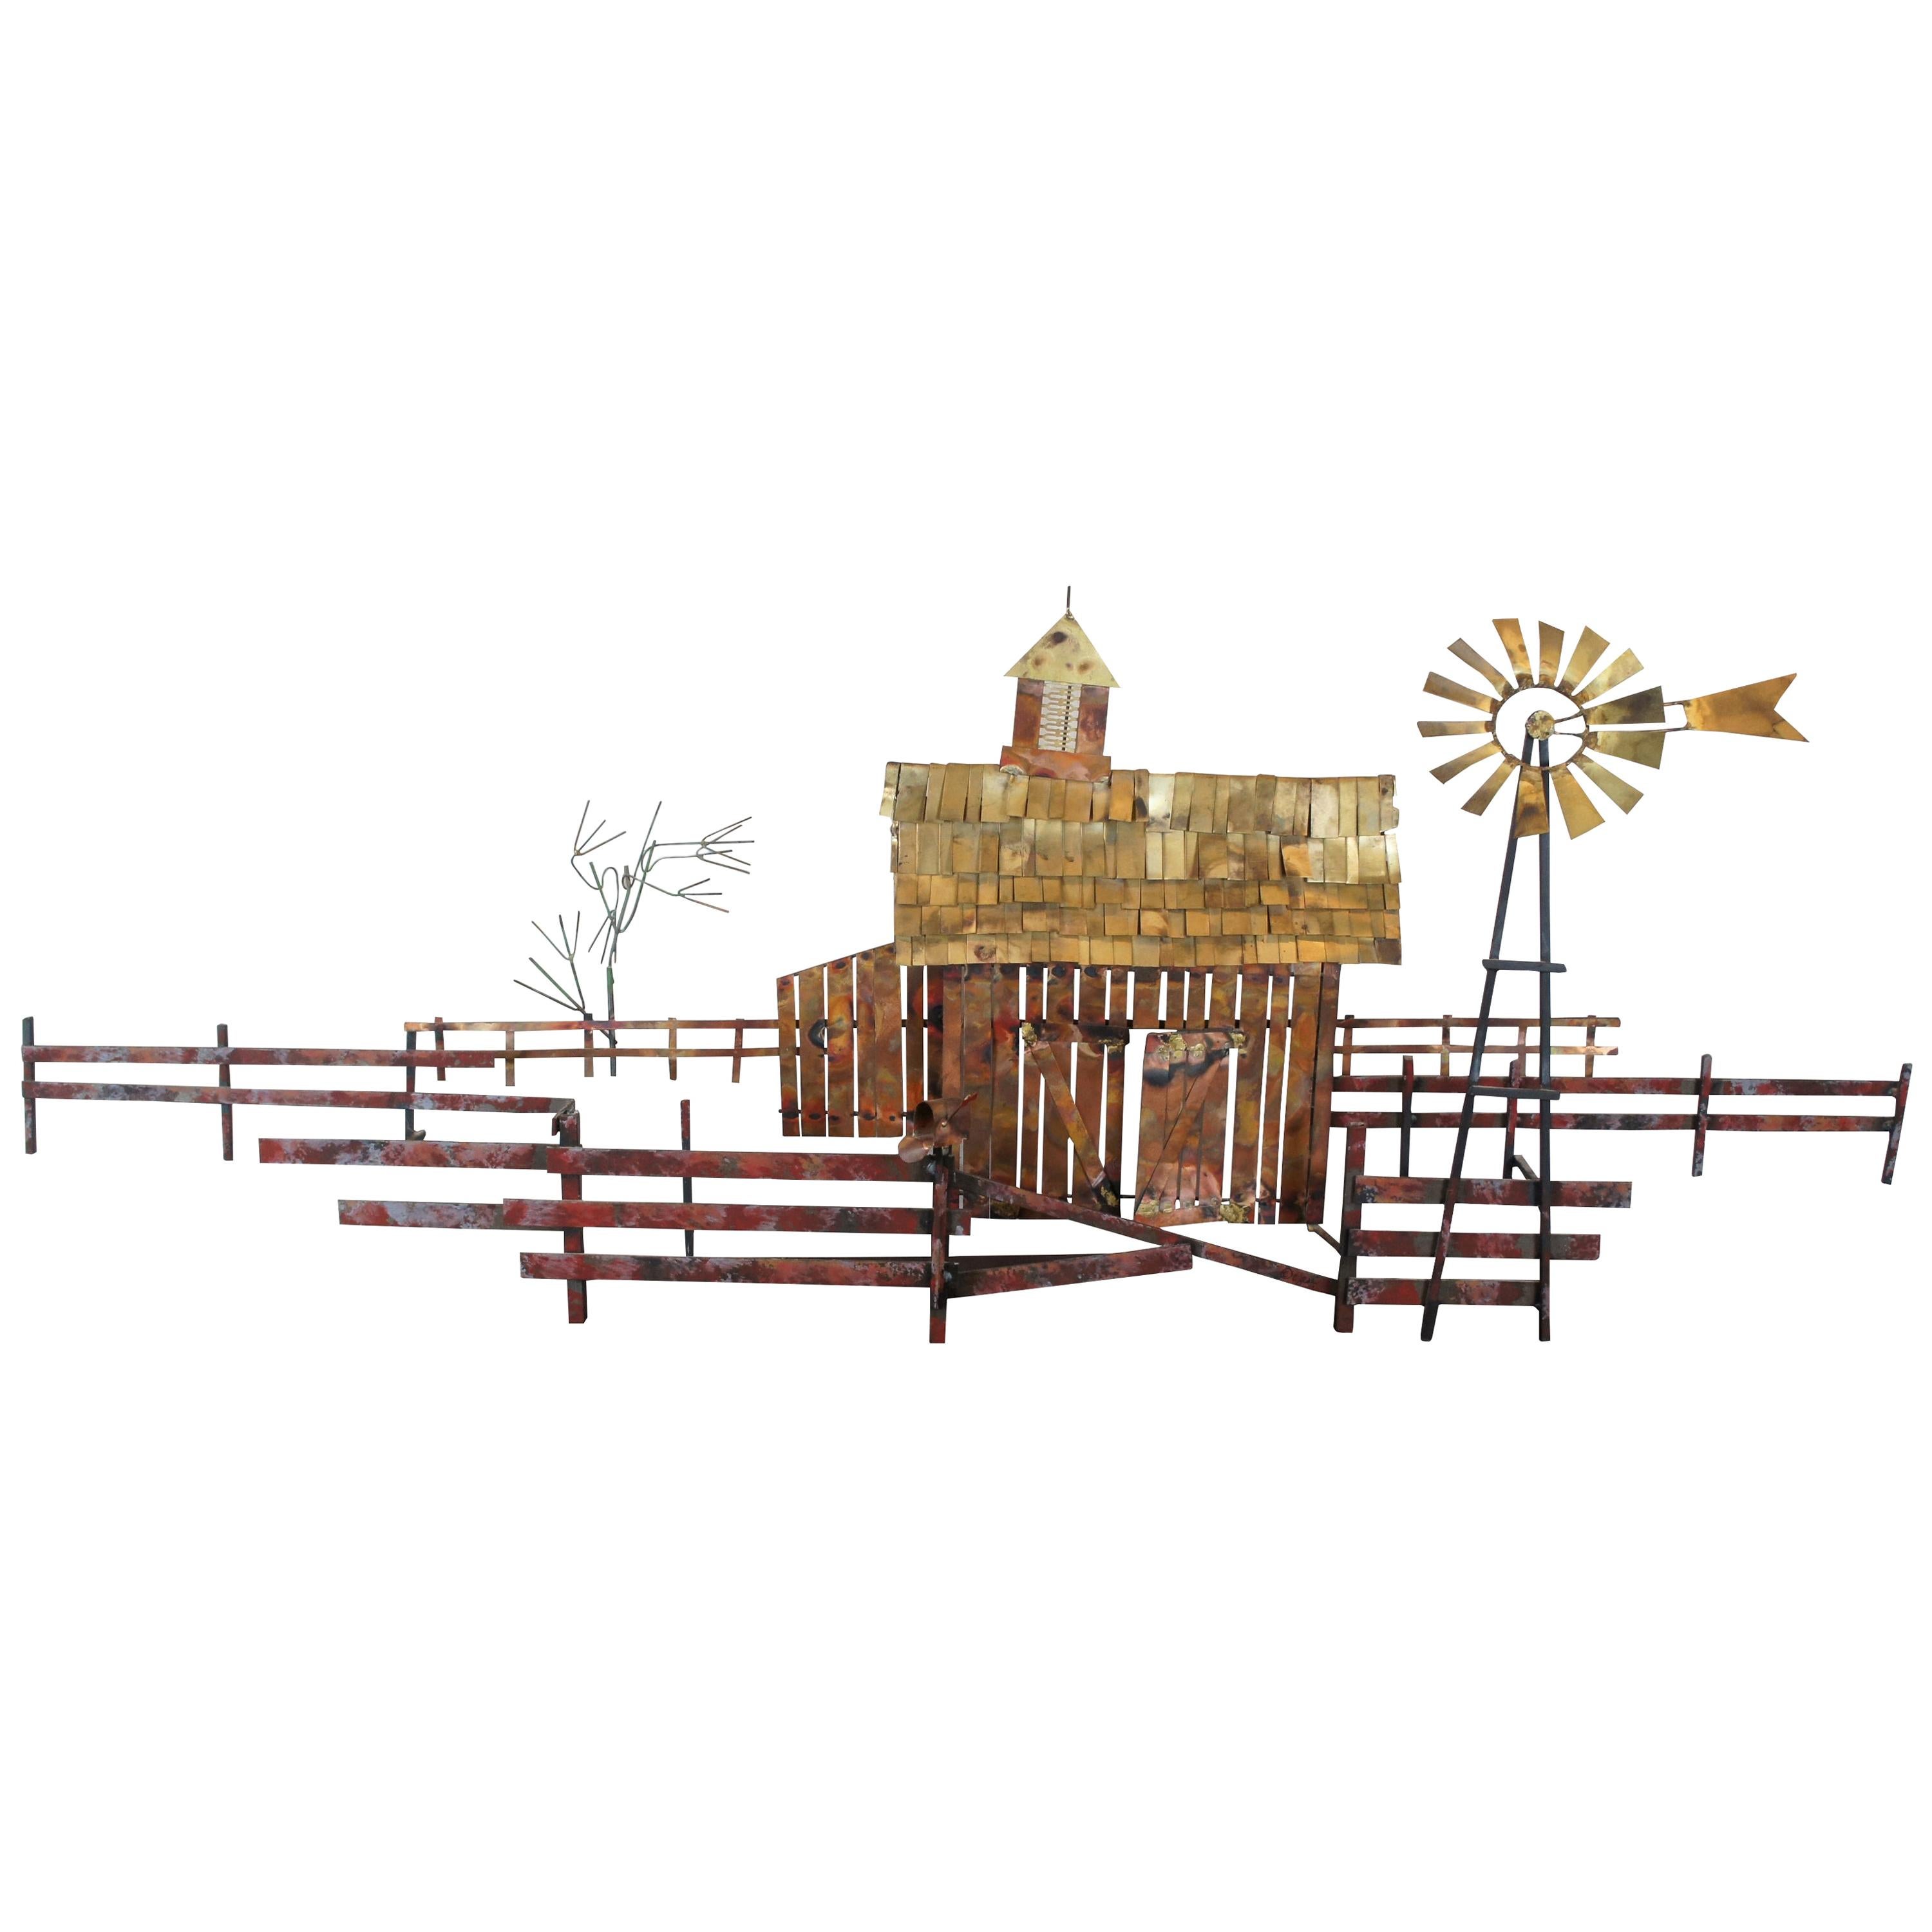 Vintage Curtis Jere Mid-Century Modern Wall Sculpture Country Farm Barn